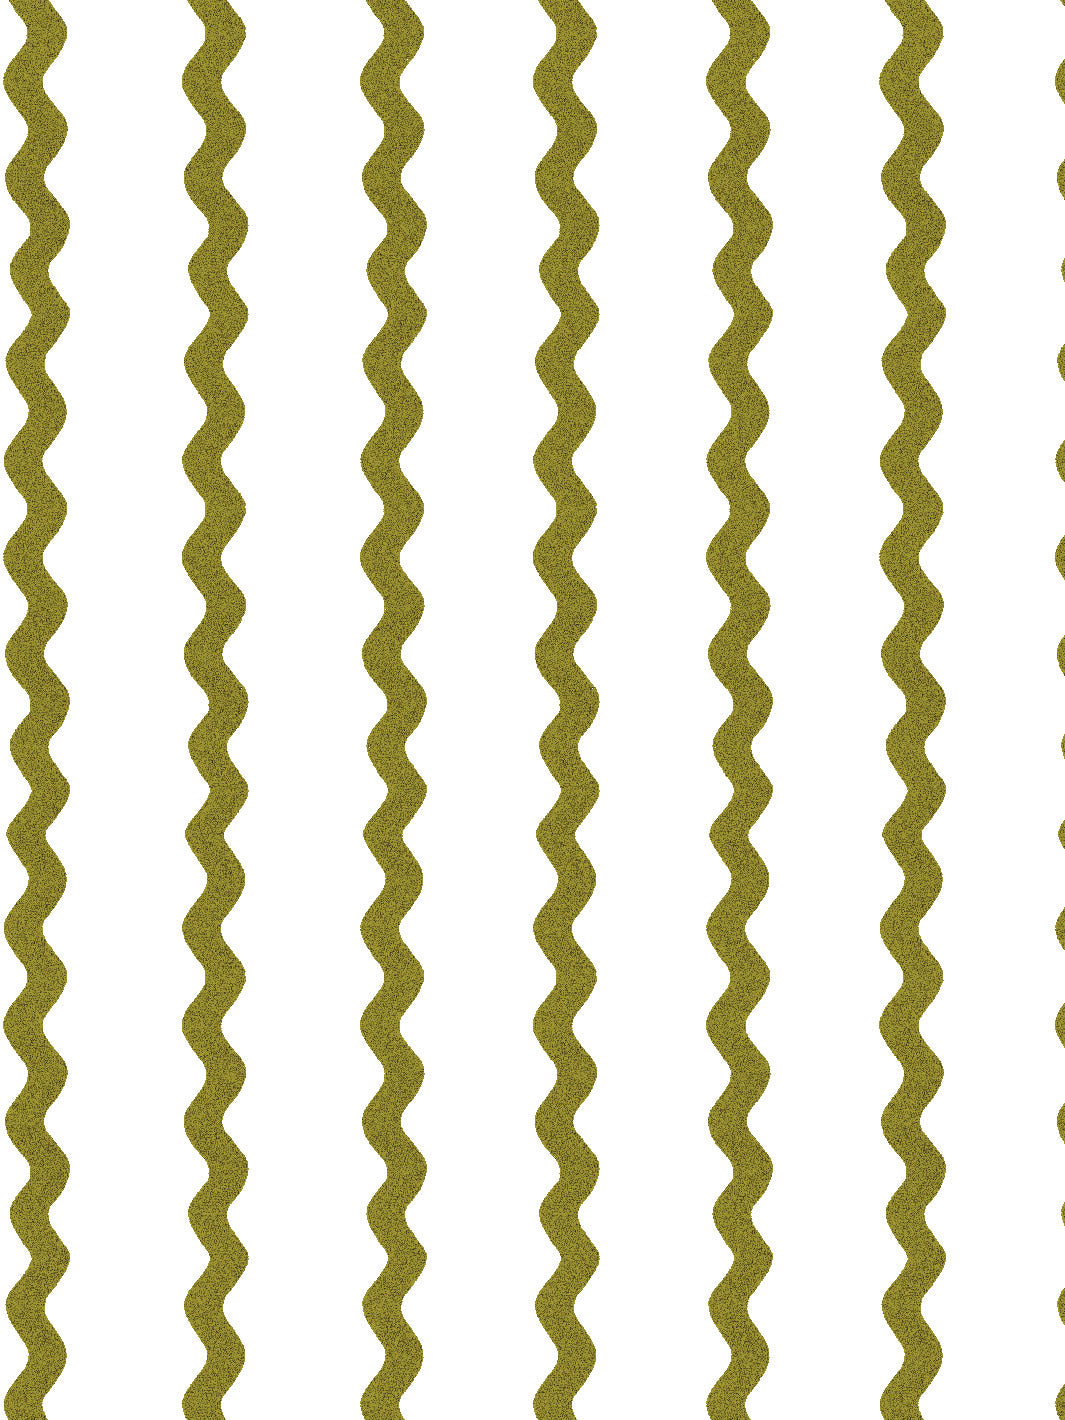 'Ric-Rac Stripe on White' Wallpaper by Sarah Jessica Parker - Olive